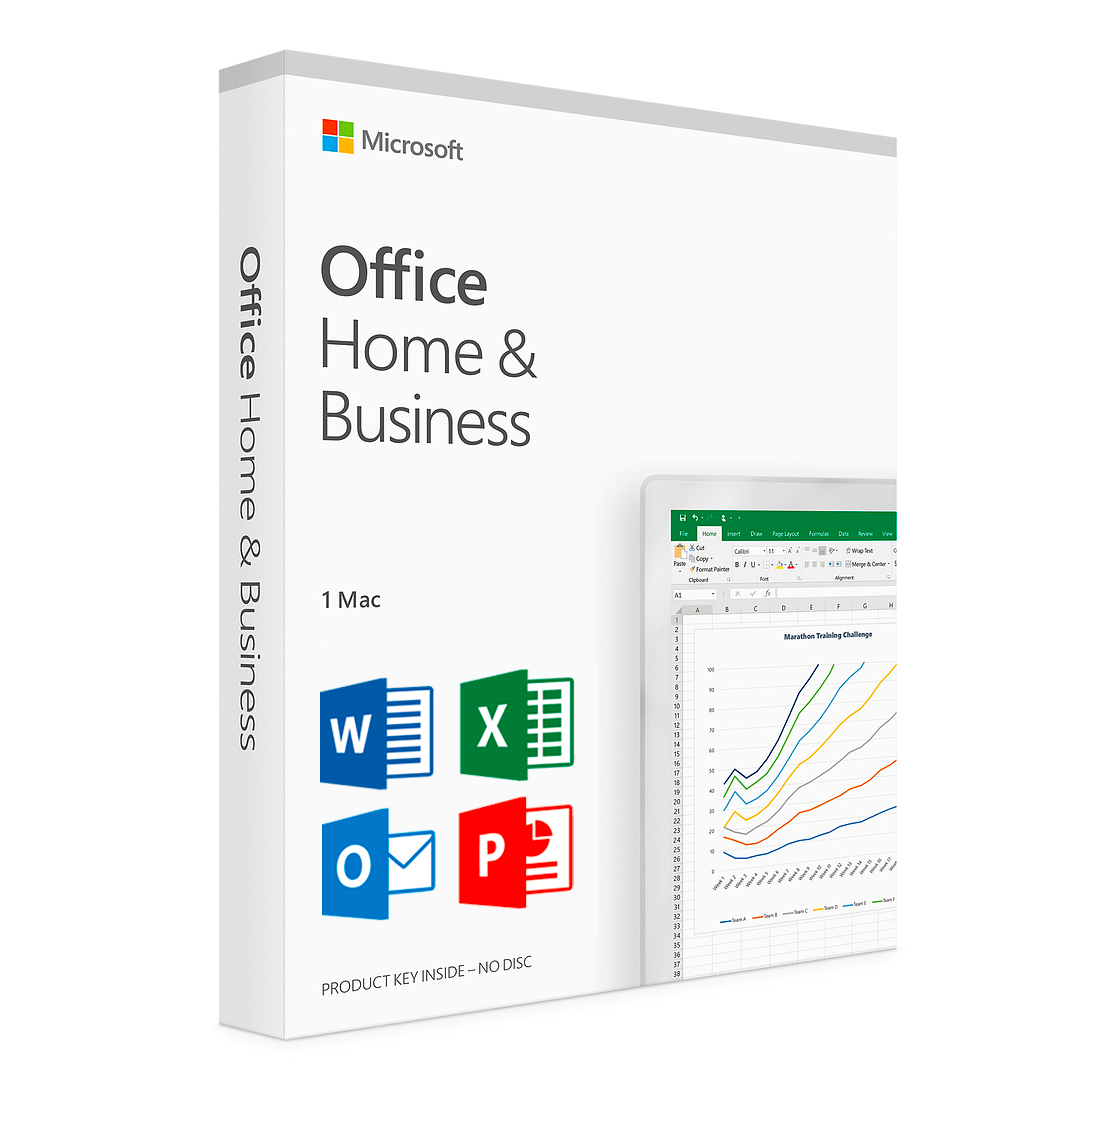 Home and business 2019. Microsoft Office 2019 Home and Business. Office 2021 Pro Plus. Microsoft Office 2019 Home and Business, Box. Office 2019 Home and Business Mac.